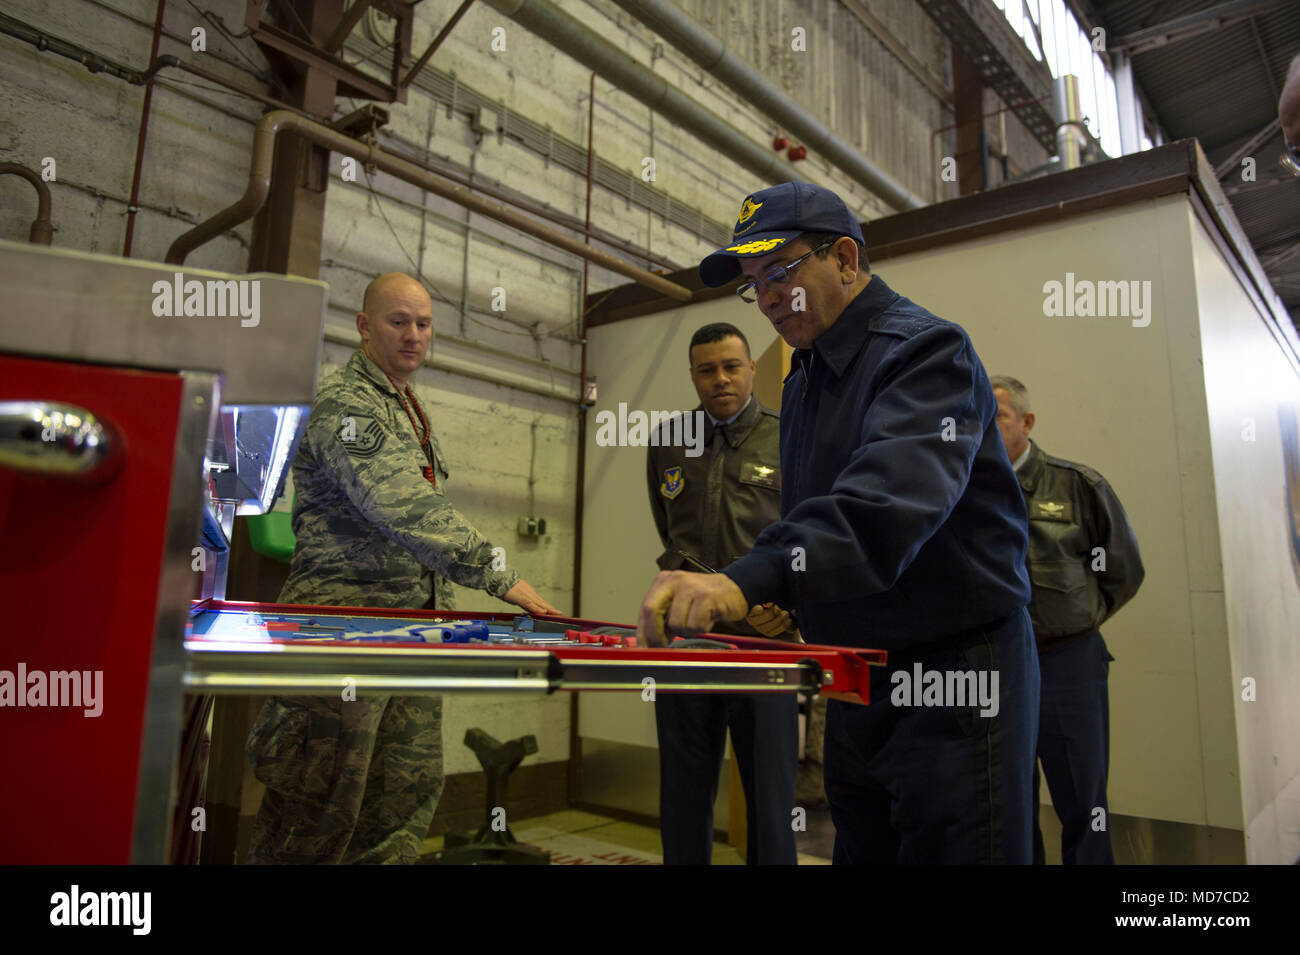 Maj. Gen. Hassan Fakri, Royal Moroccan Air Force deputy inspector, examines an automated toolbox during a tour of Hangar 1 at Spangdahlem Air Base, Germany, March 28, 2018. The visit marked the first time the RMAF has visited the 52nd Fighter Wing, allowing for reinforcement in bilateral relationship as well as a means to identify future security cooperation priorities between the USAF and RMAF. (U.S. Air Force photo by Senior Airman Dawn M. Weber) Stock Photo